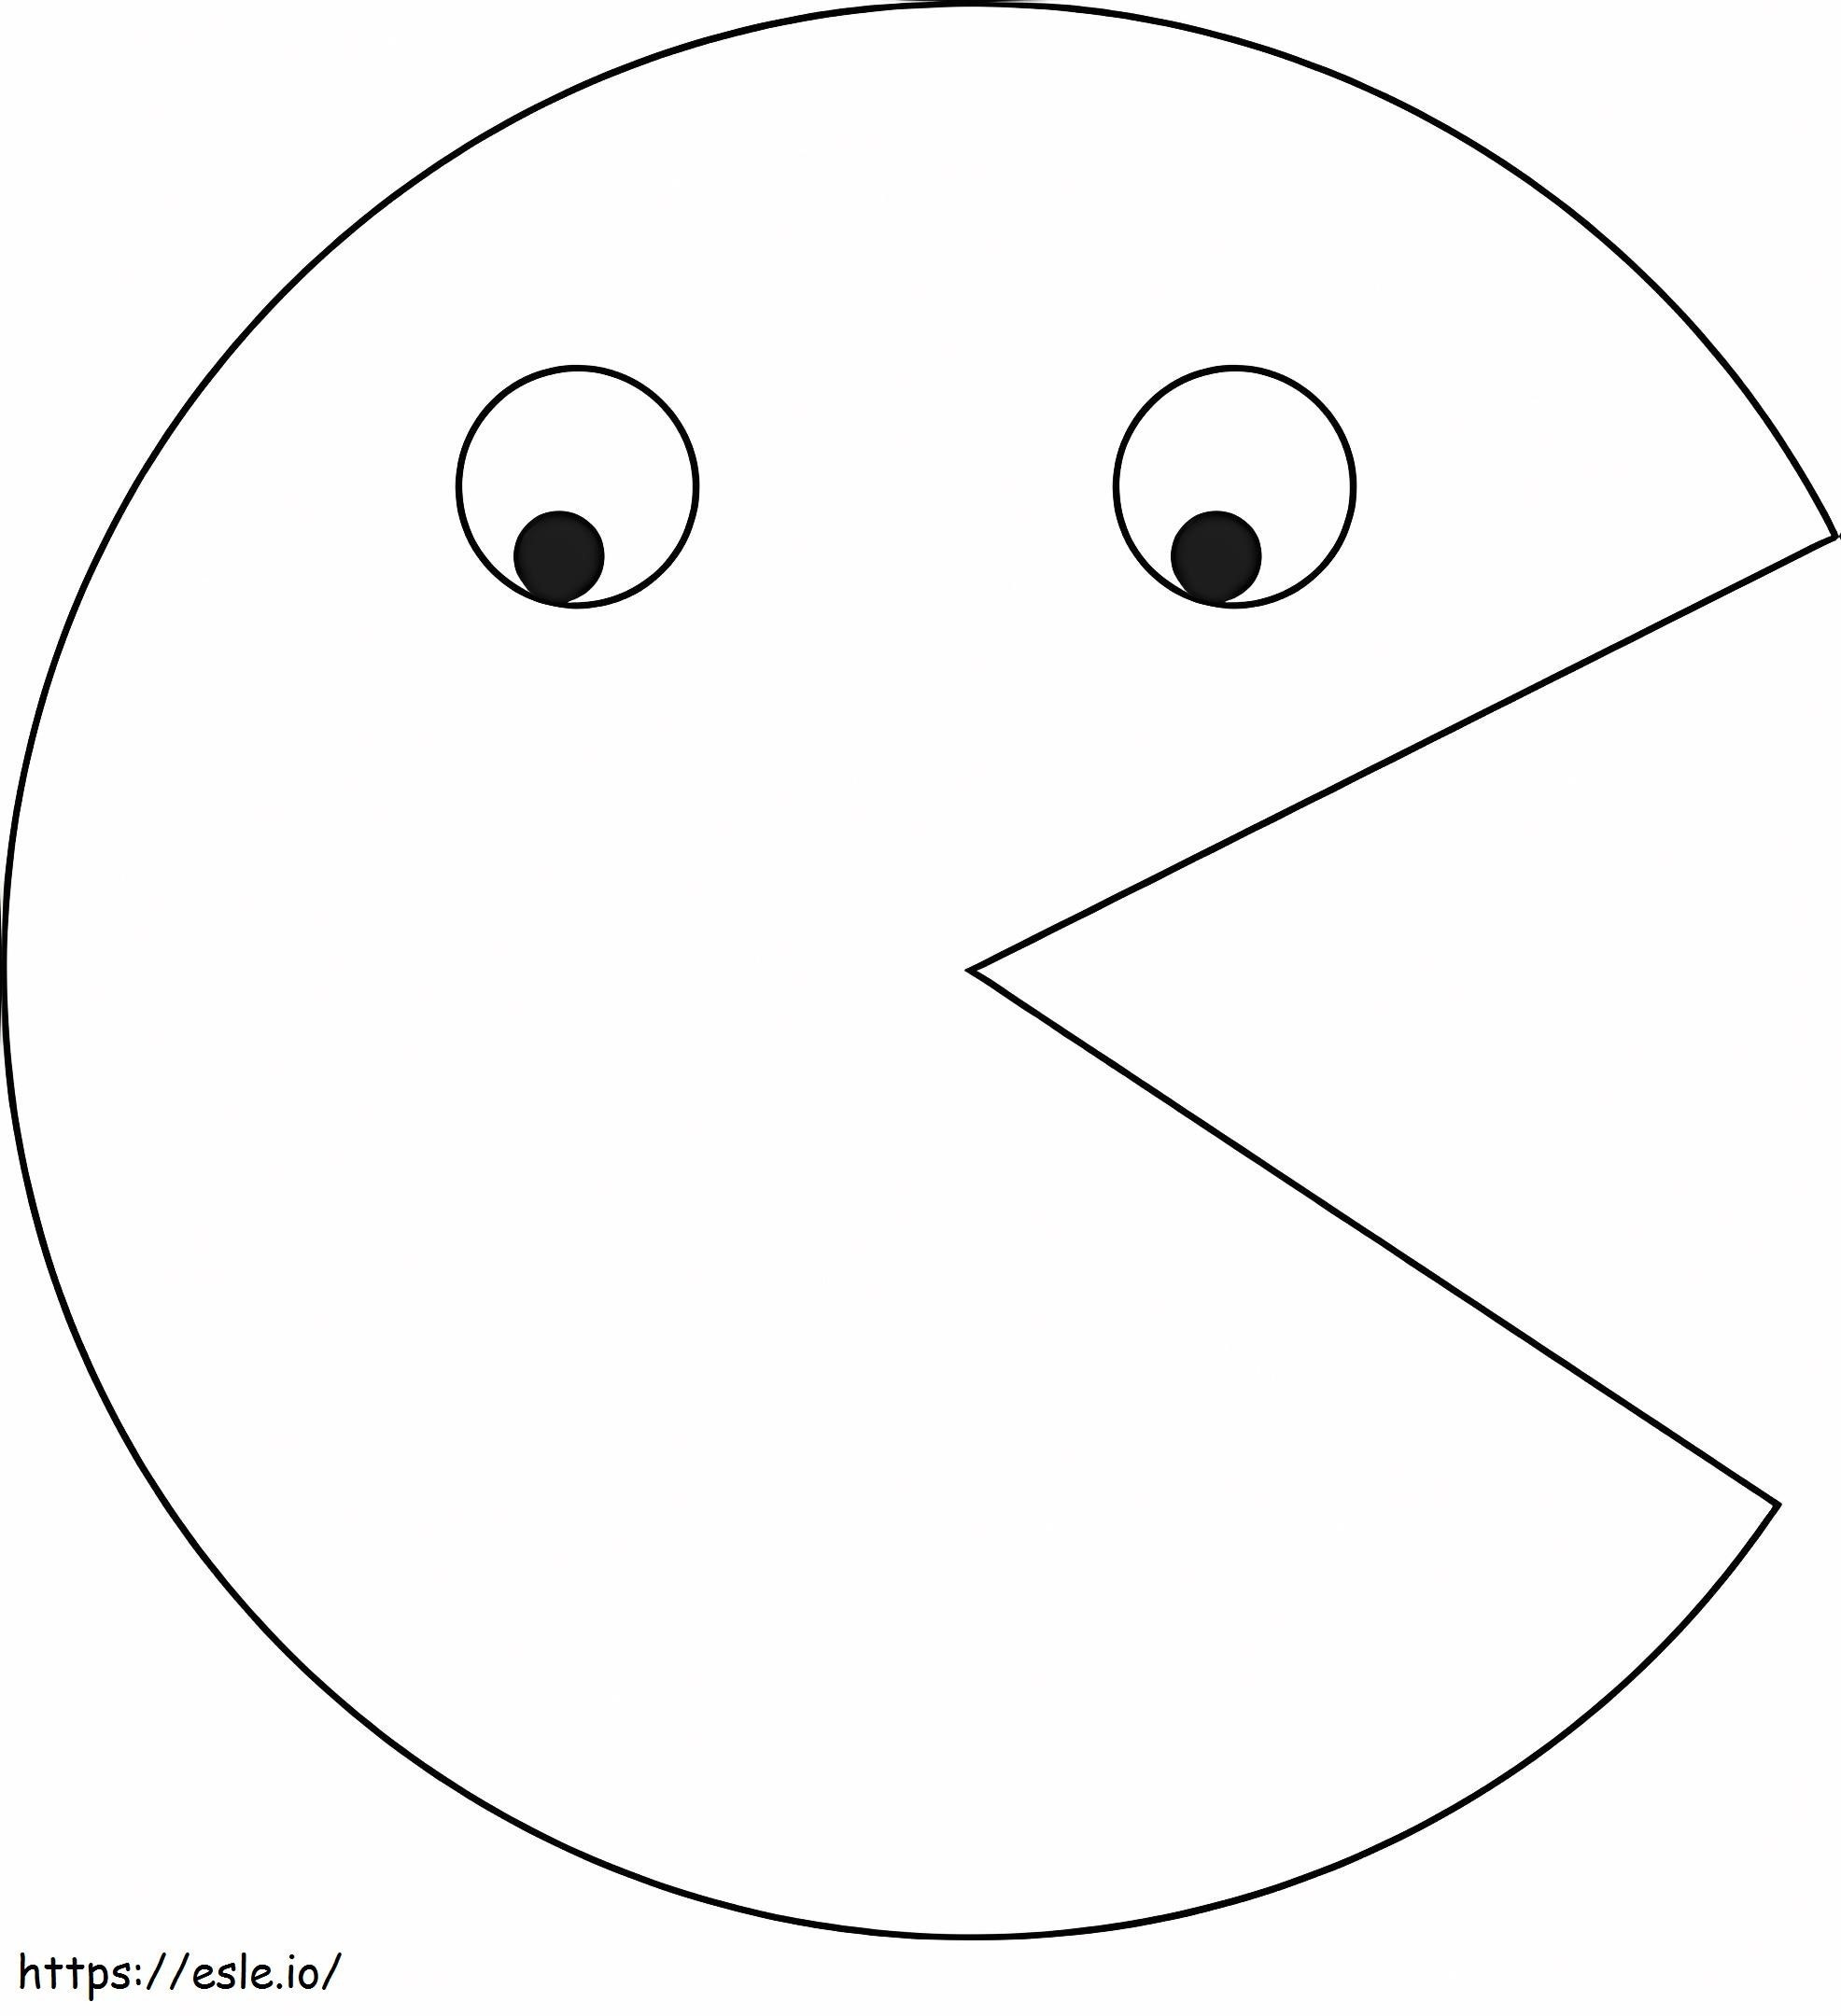 Great Pacman coloring page